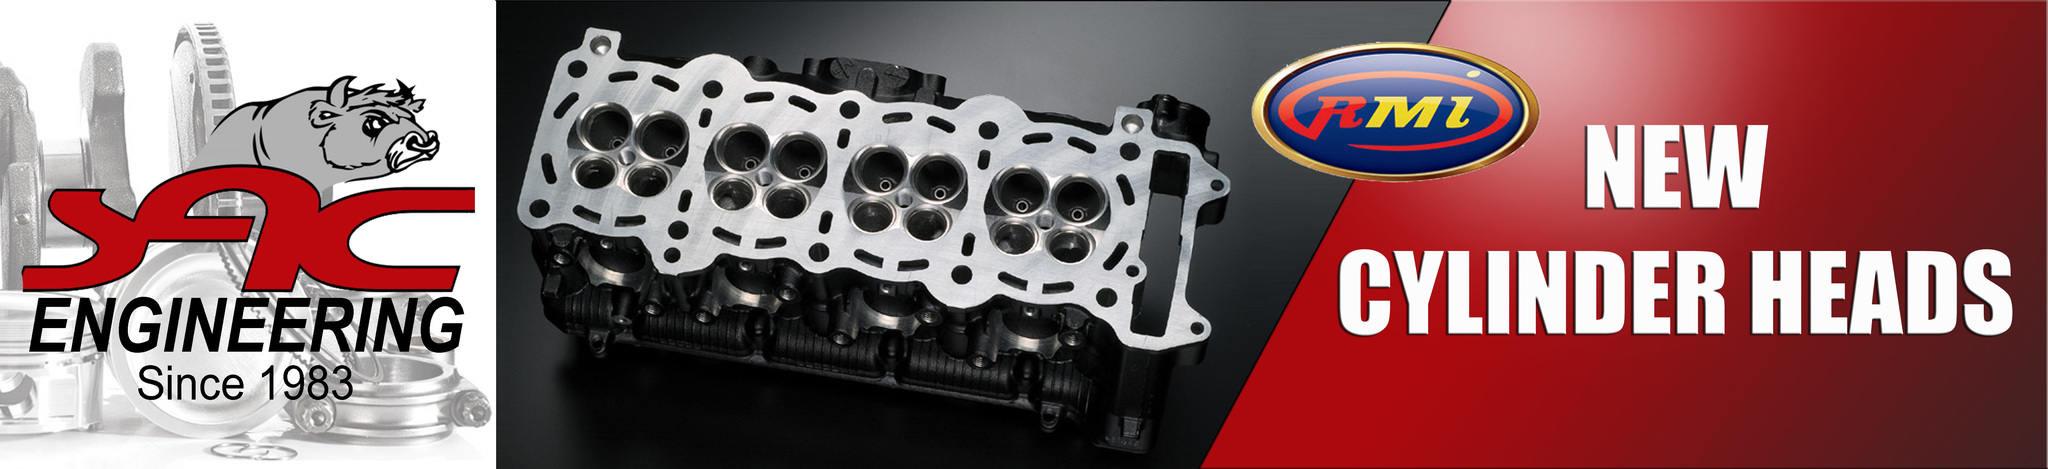 Cylinder Heads for sale